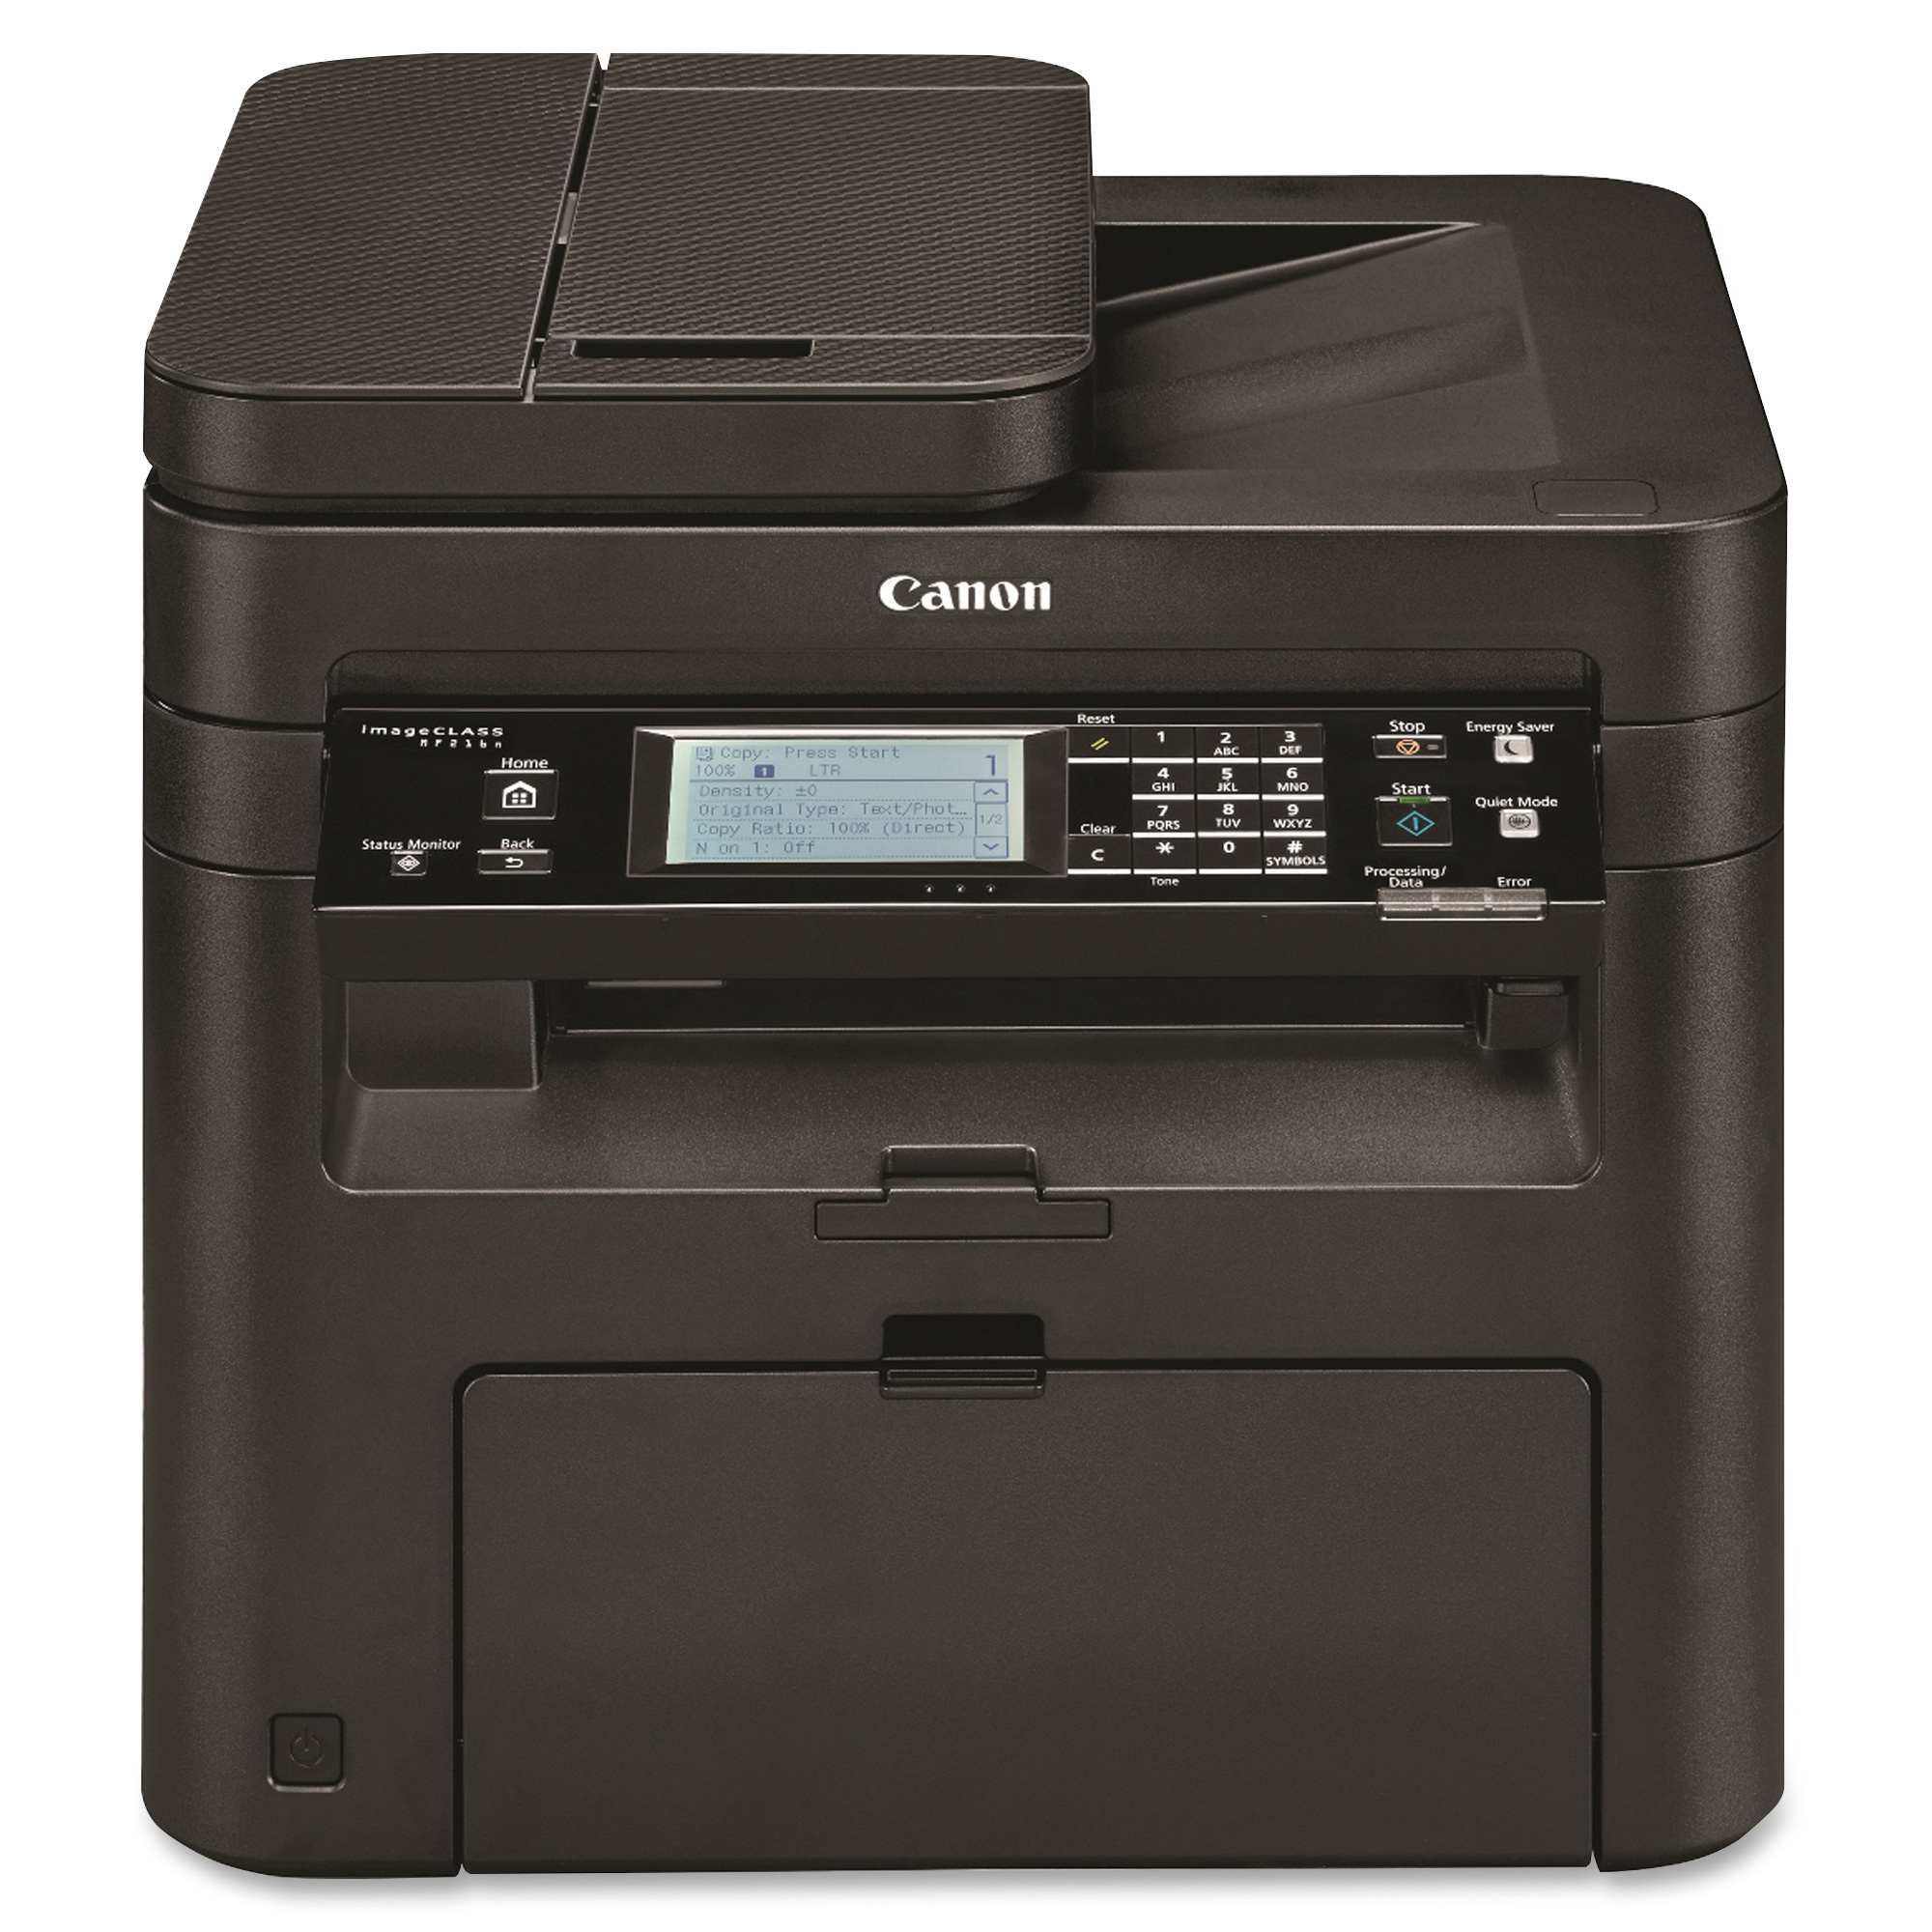 imageCLASS MF216n All-in-One Laser AirPrint Printer Copier Scanner Fax - image 1 of 4